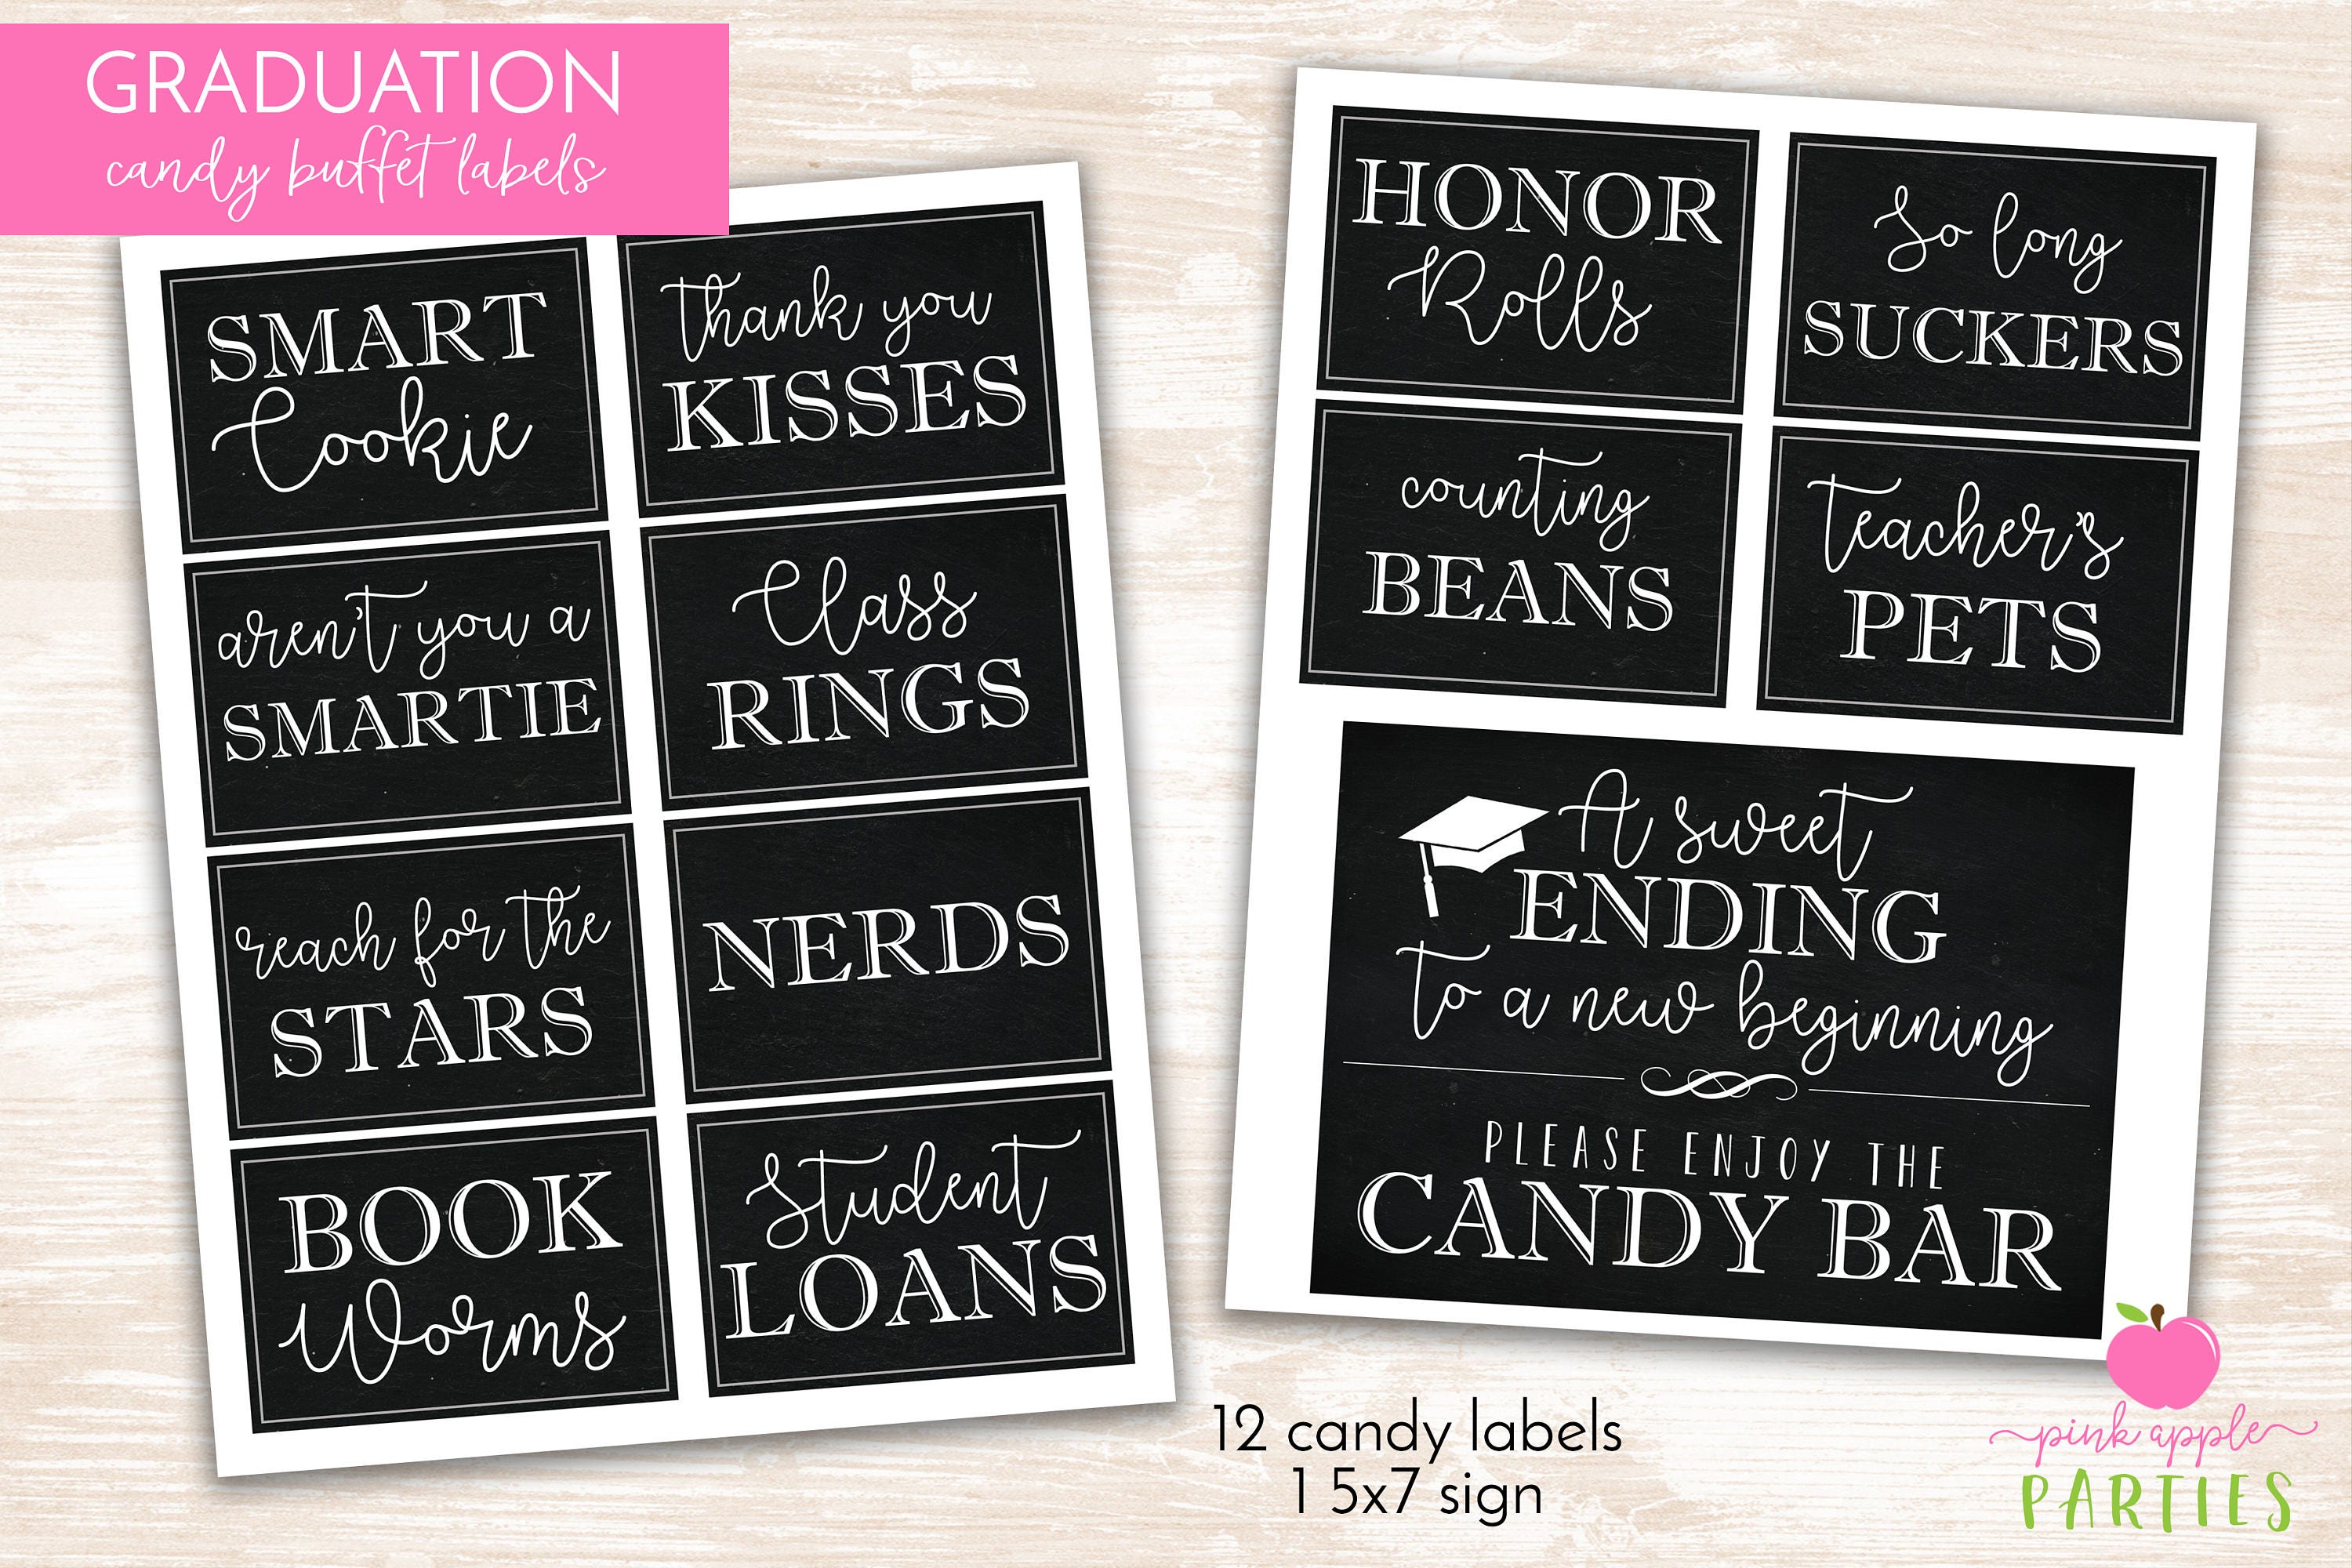 graduation-party-candy-signs-candy-bar-candy-buffet-smartie-cookie